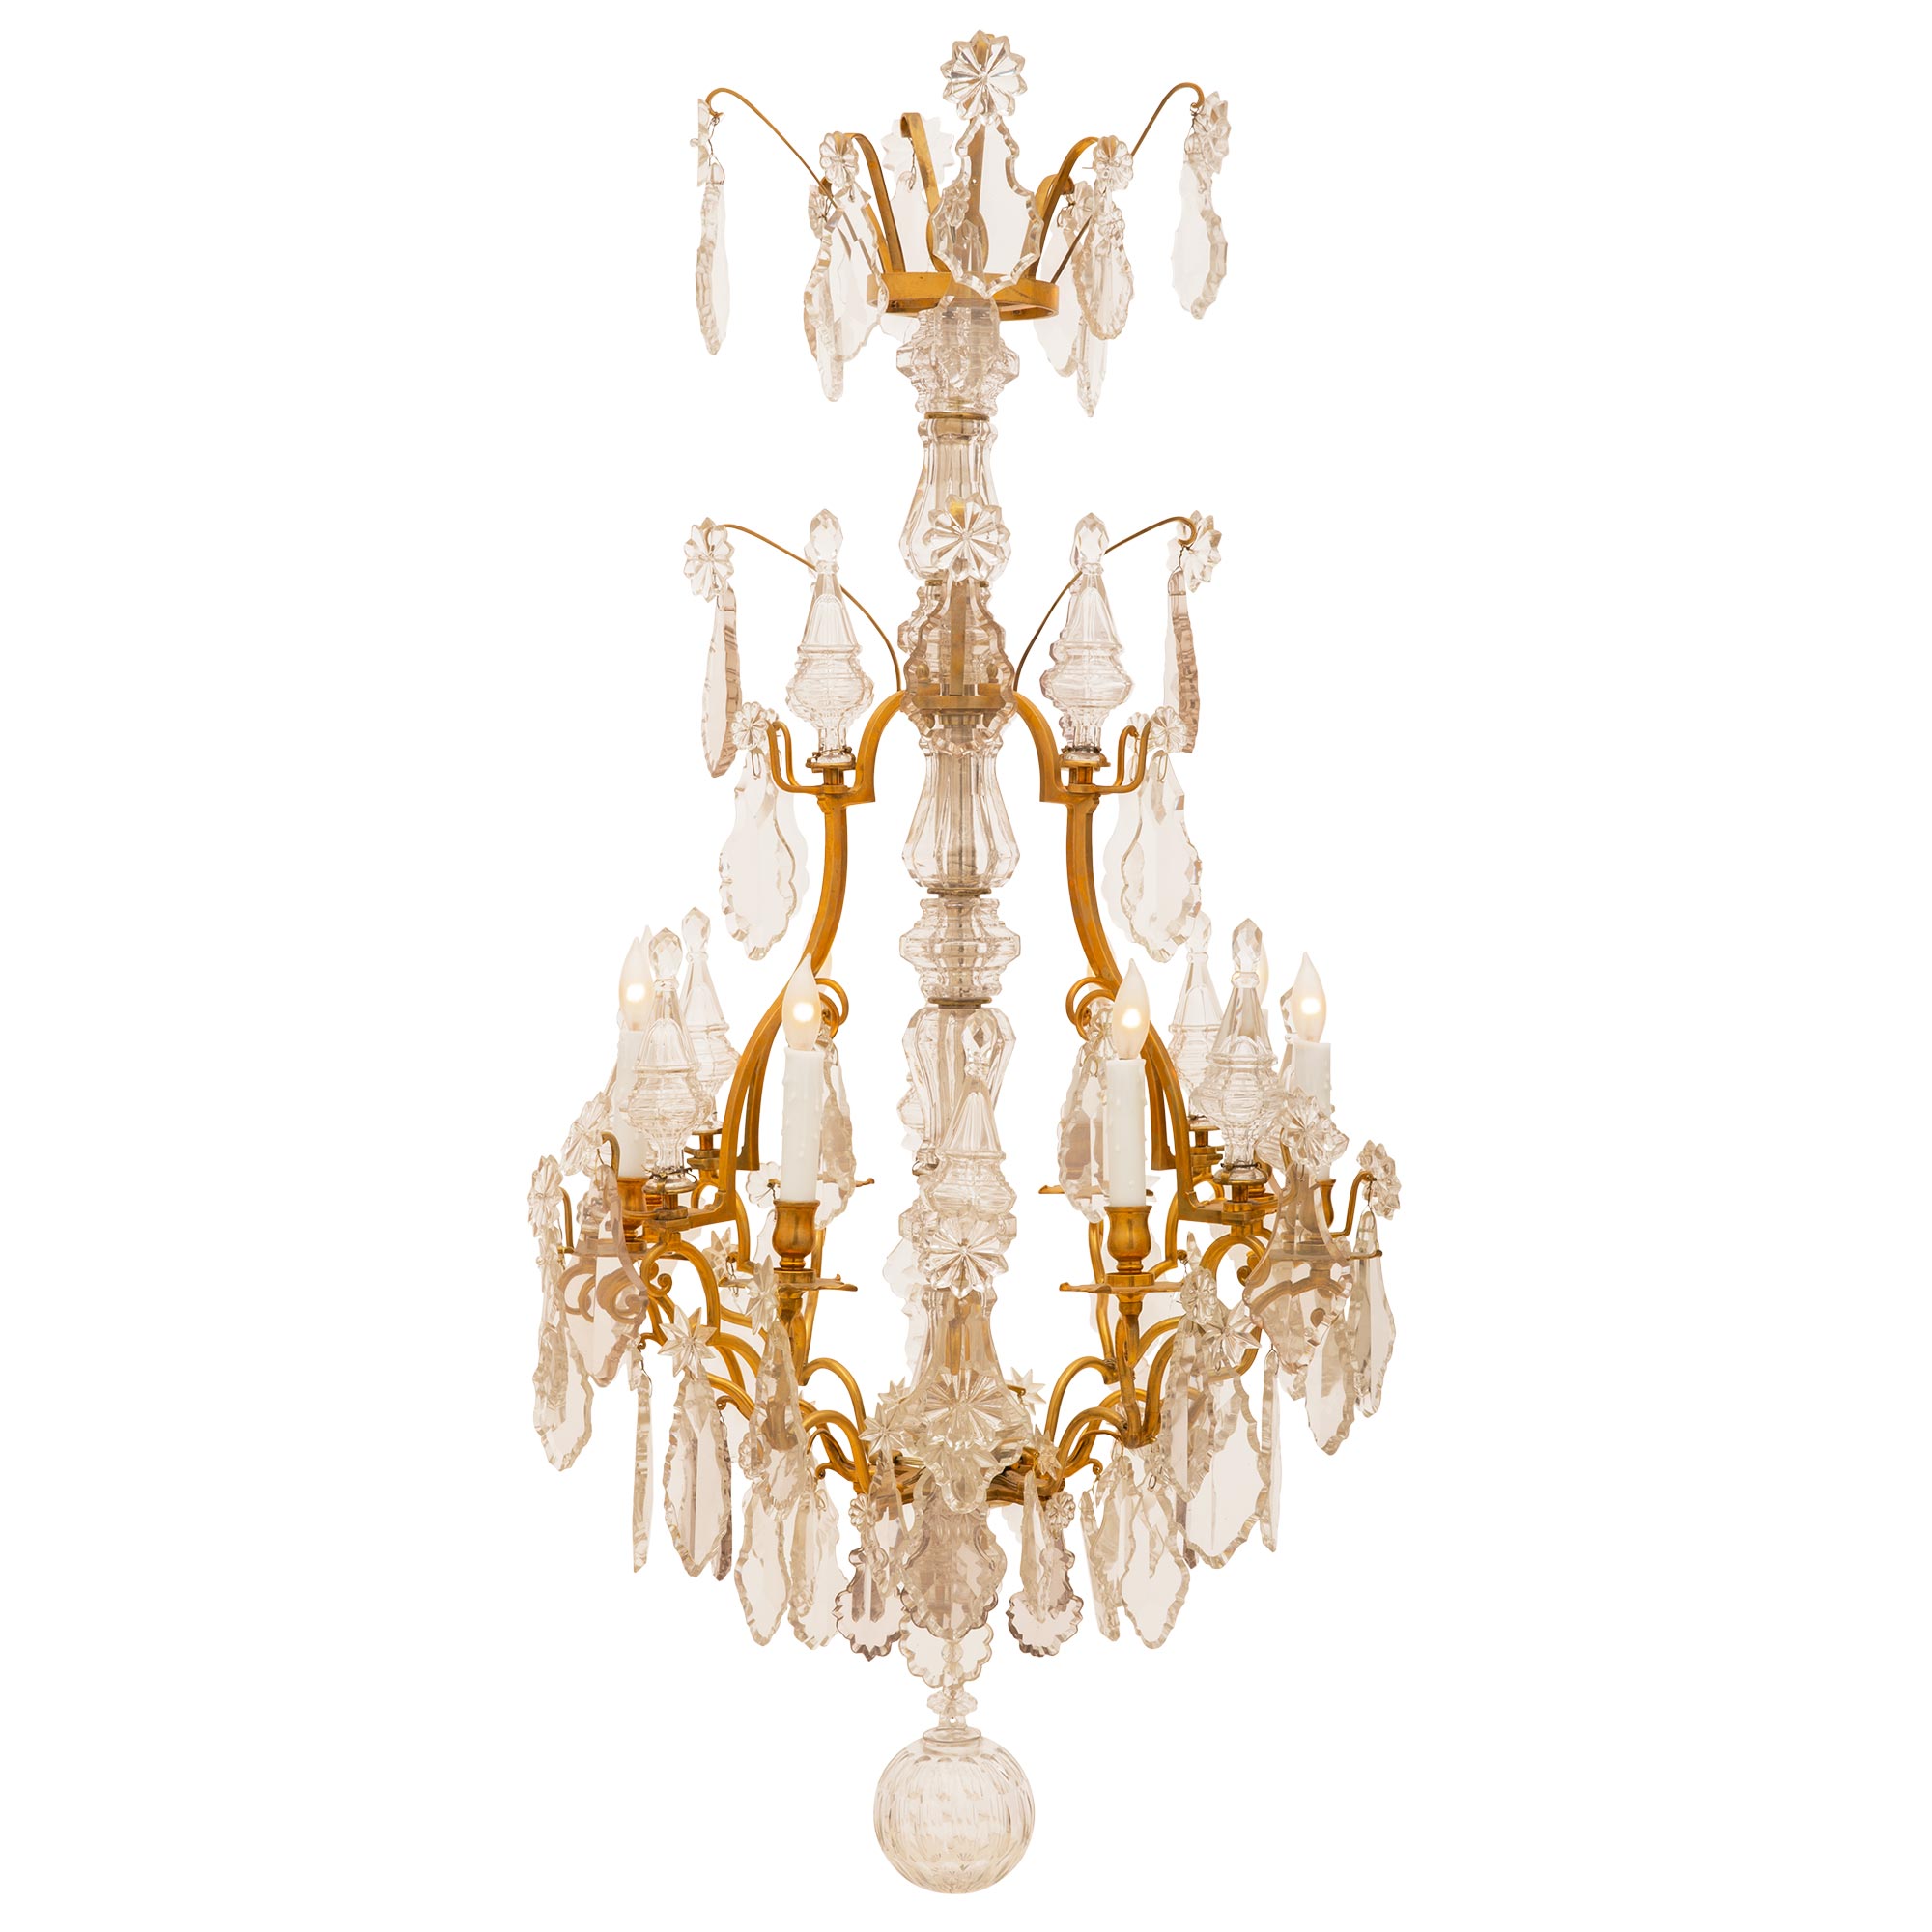 French 19th Century Louis XV Style Crystal and Ormolu Eight-Light Chandelier For Sale